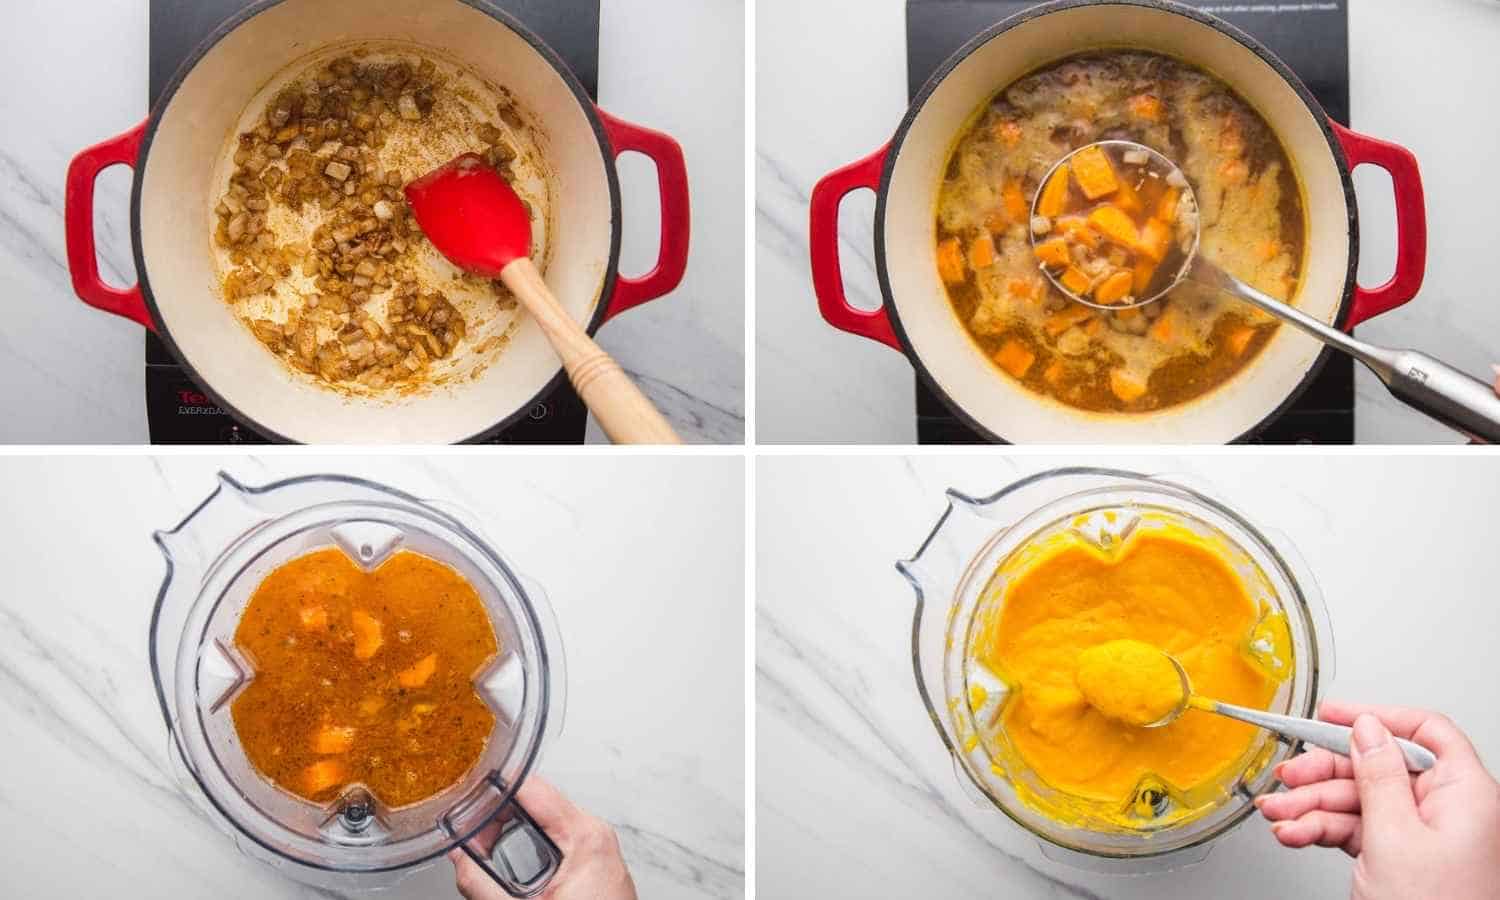 Collage of four images showing how to make carrot soup and blend it before serving